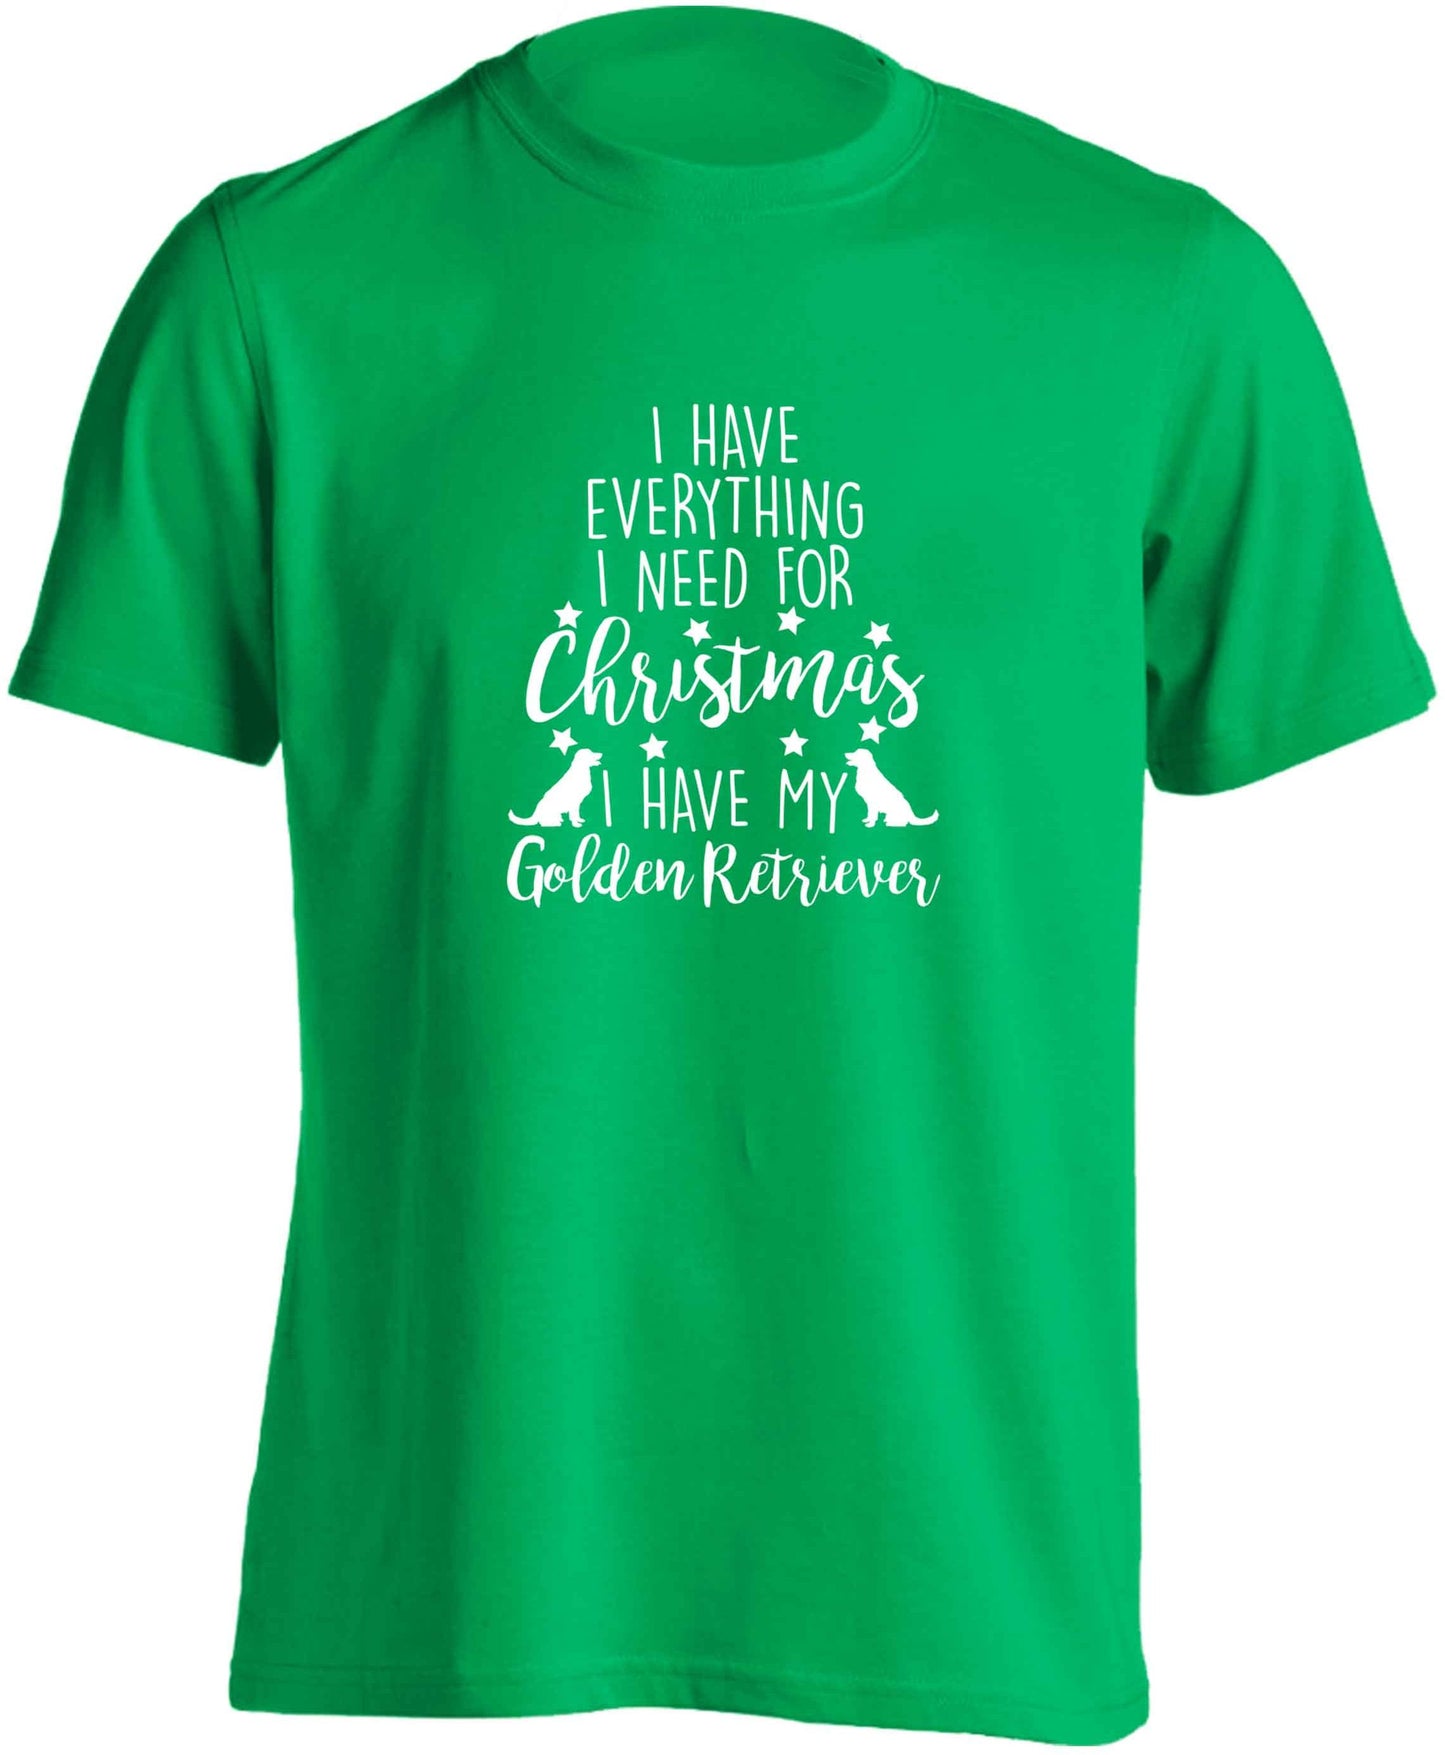 I have everything I need for Christmas I have my golden retriever adults unisex green Tshirt 2XL